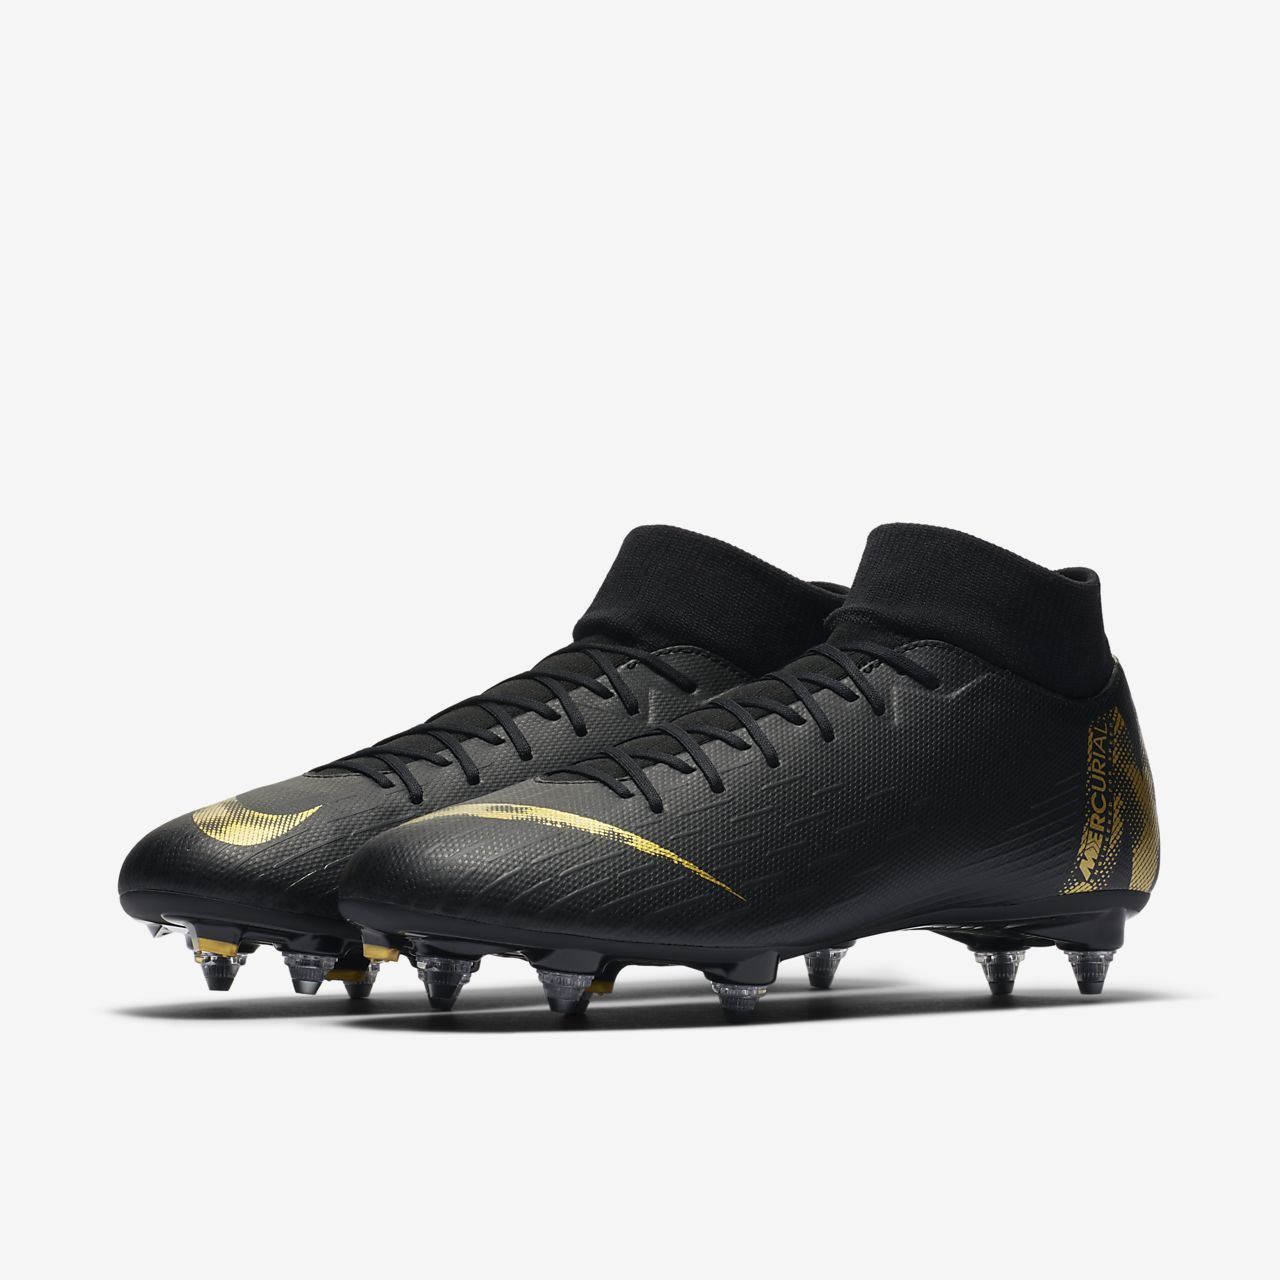 Nike Mercurial Superfly 7 Elite Ag Pro M AT7892 414 shoes.